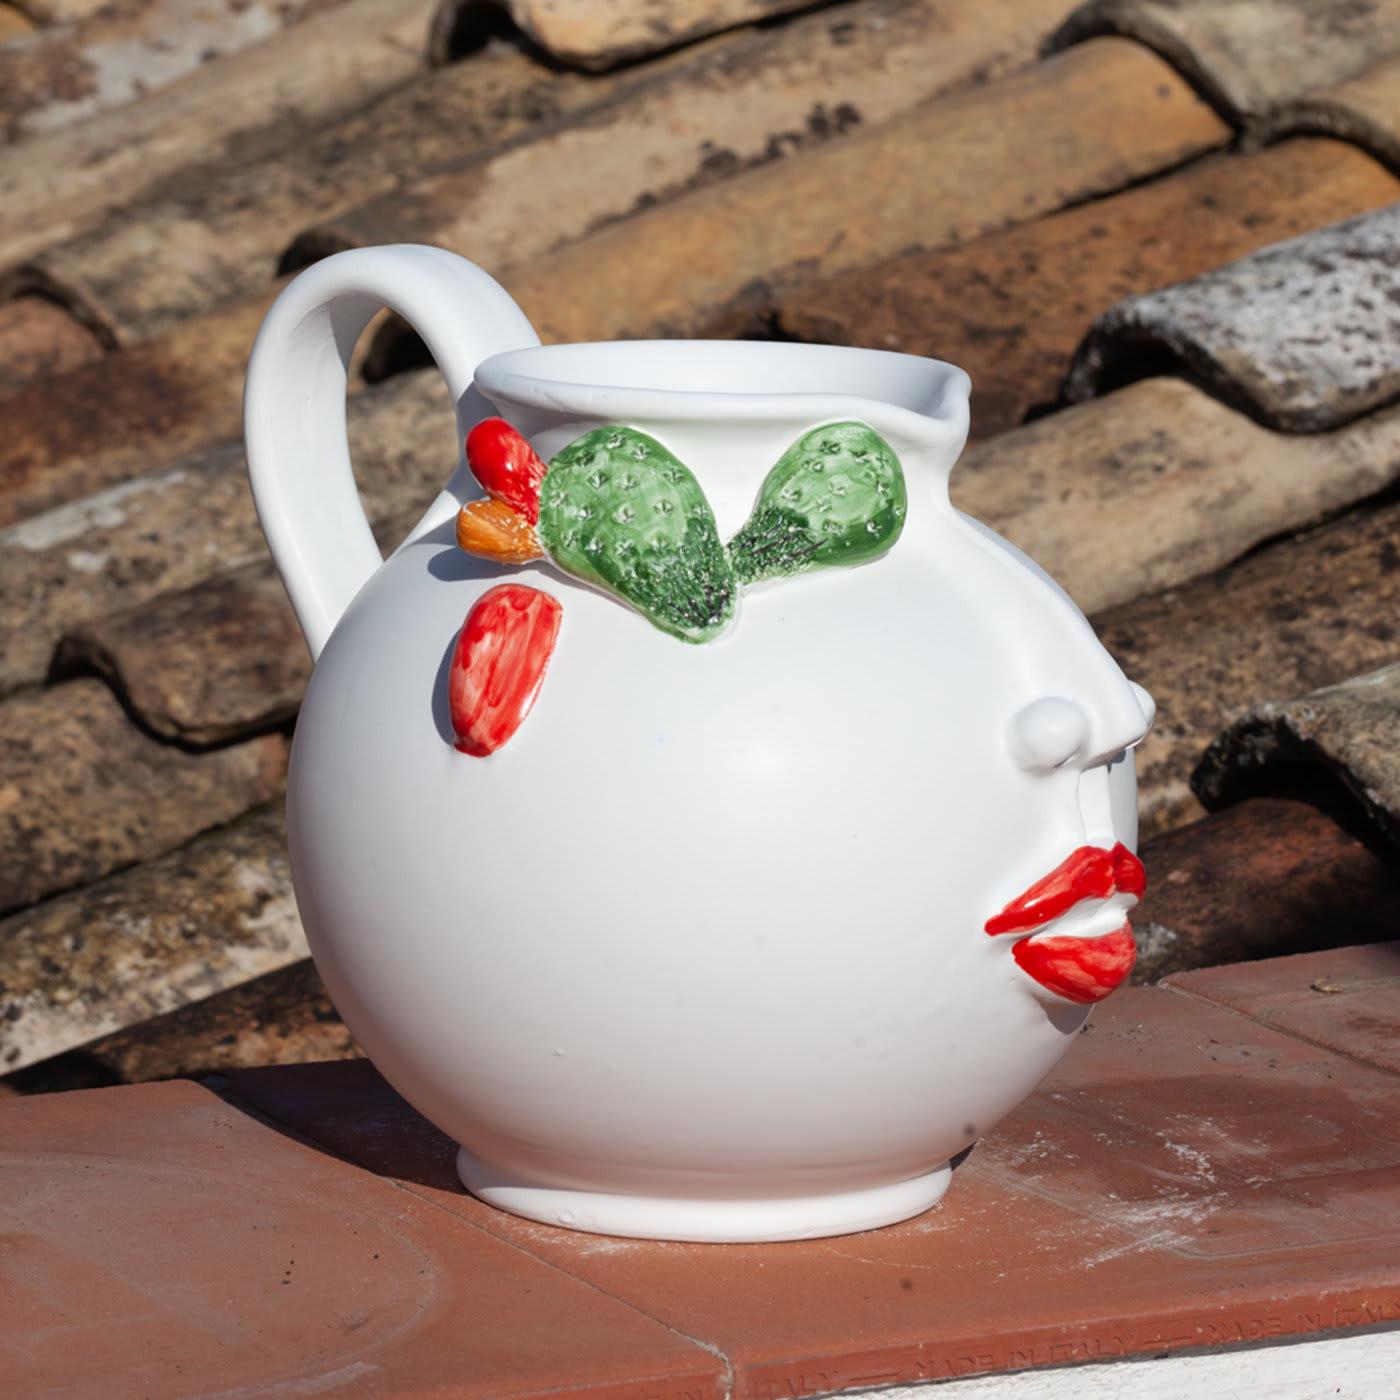 Handcrafted of matte-white-glazed ceramic by Patrizia Italiano as a tribute to the inebriating folklore of Sicilian local markets, this anthropomorphic pitcher boasts a generous silhouette embellished with colorful enamels accenting its traits. Its